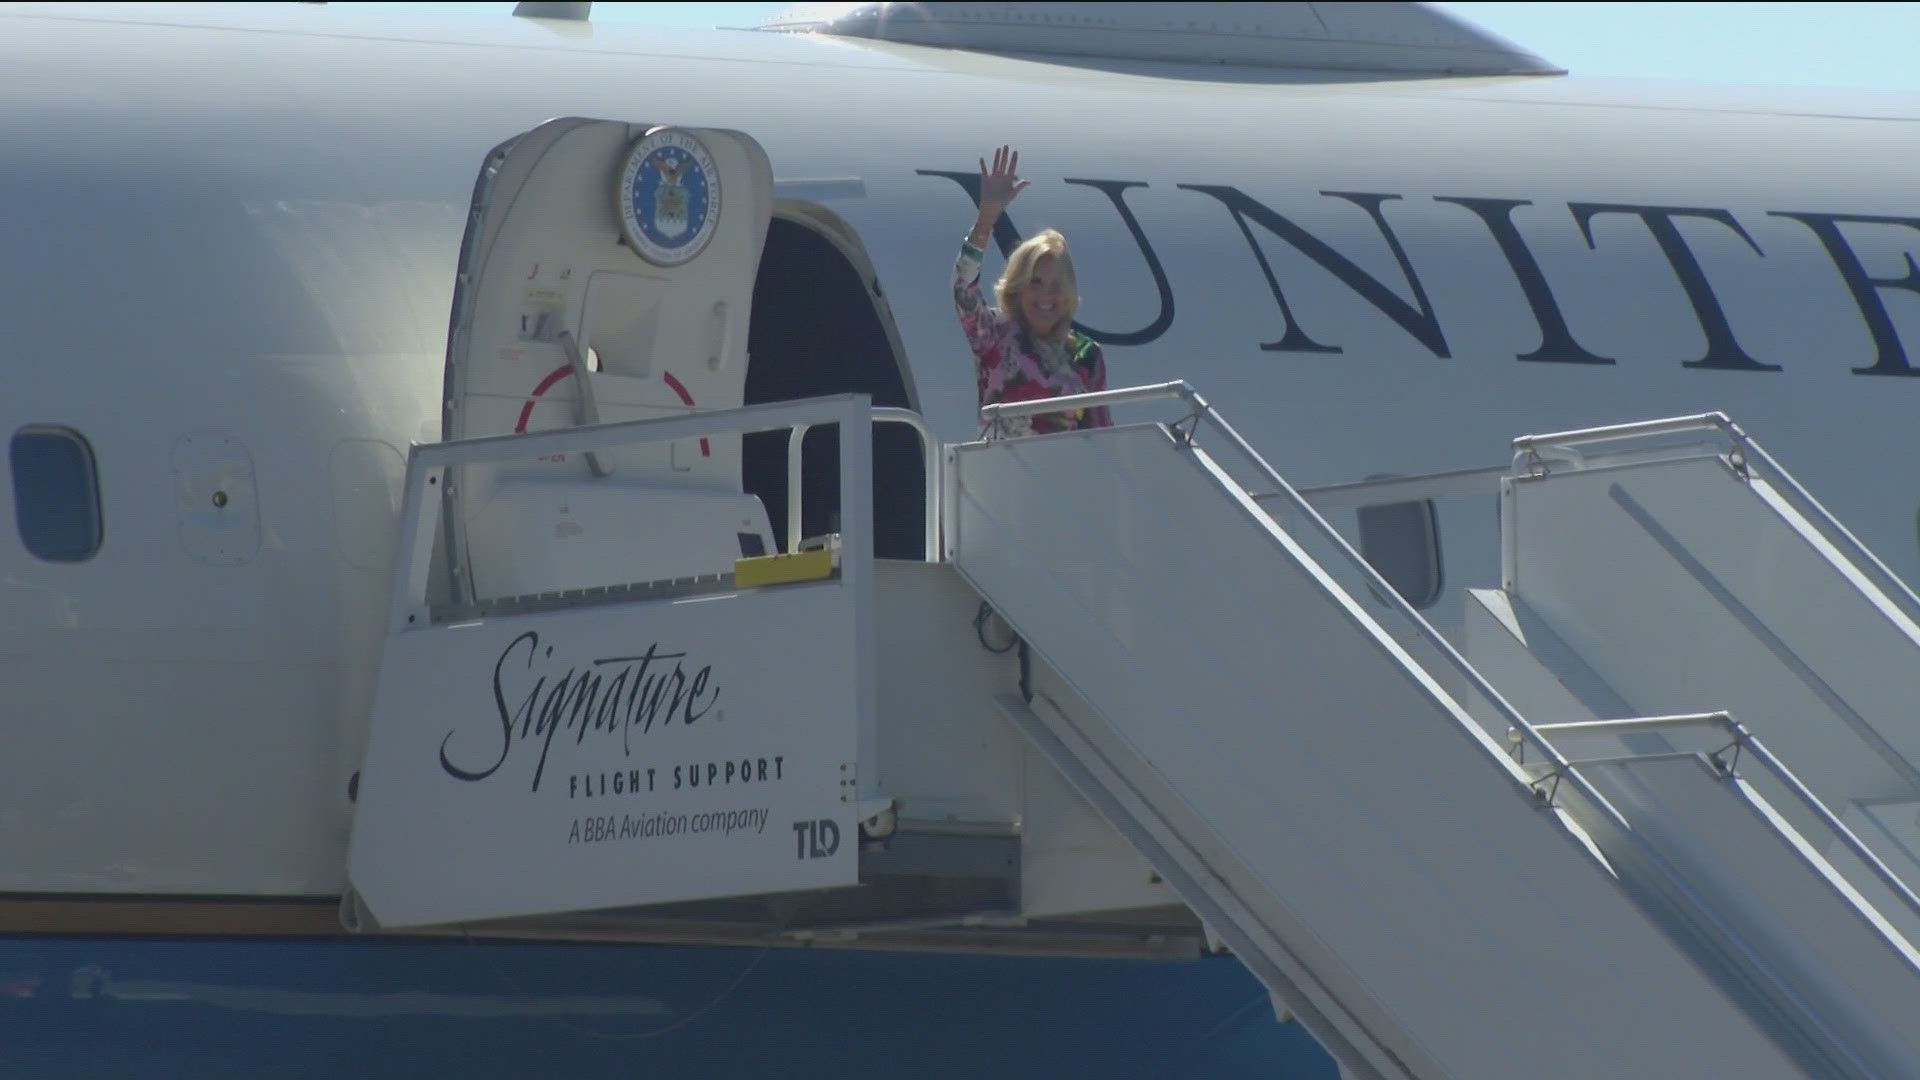 The first lady landed at San Diego International Airport at a little after 2 p.m. Saturday. San Diego Mayor Todd Gloria greeted her at the airport.